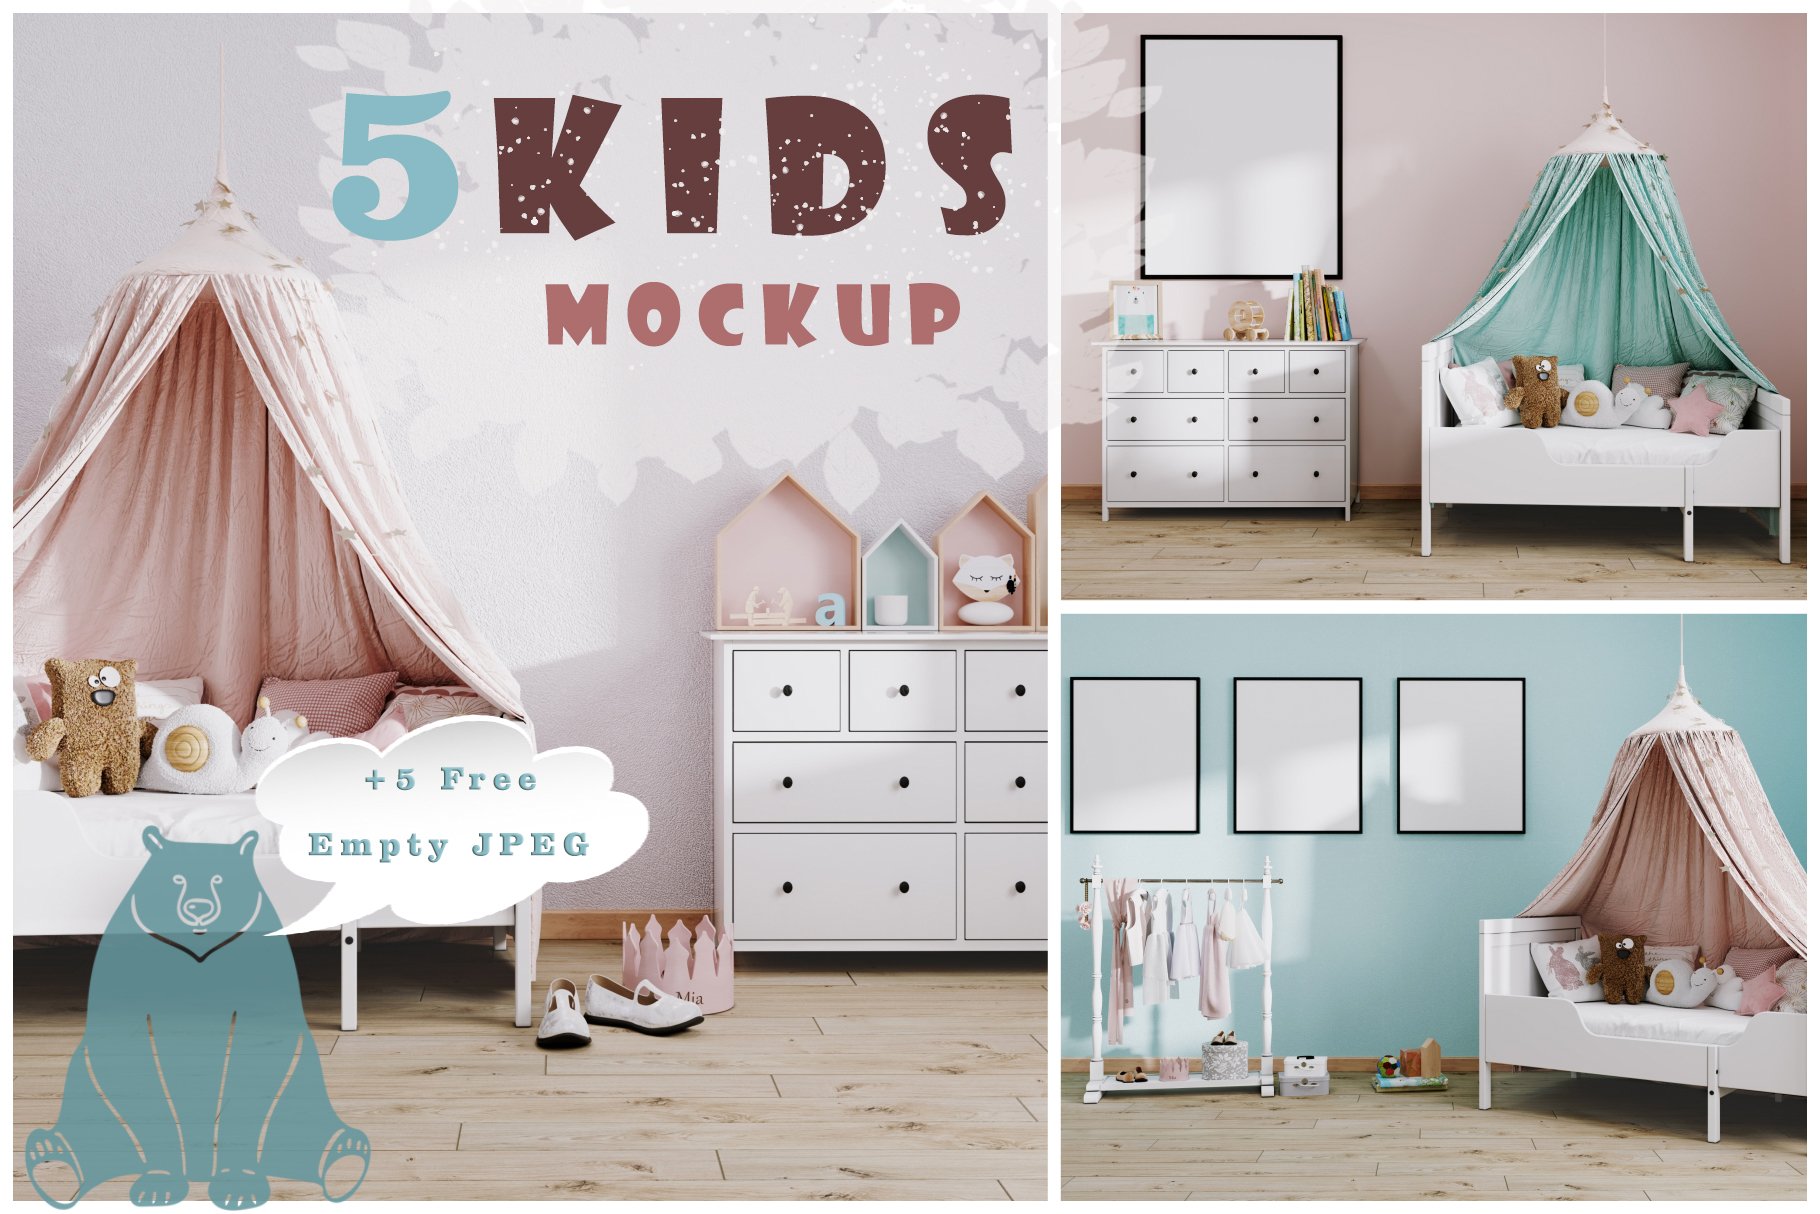 Kids bedroom interior in the different styles.